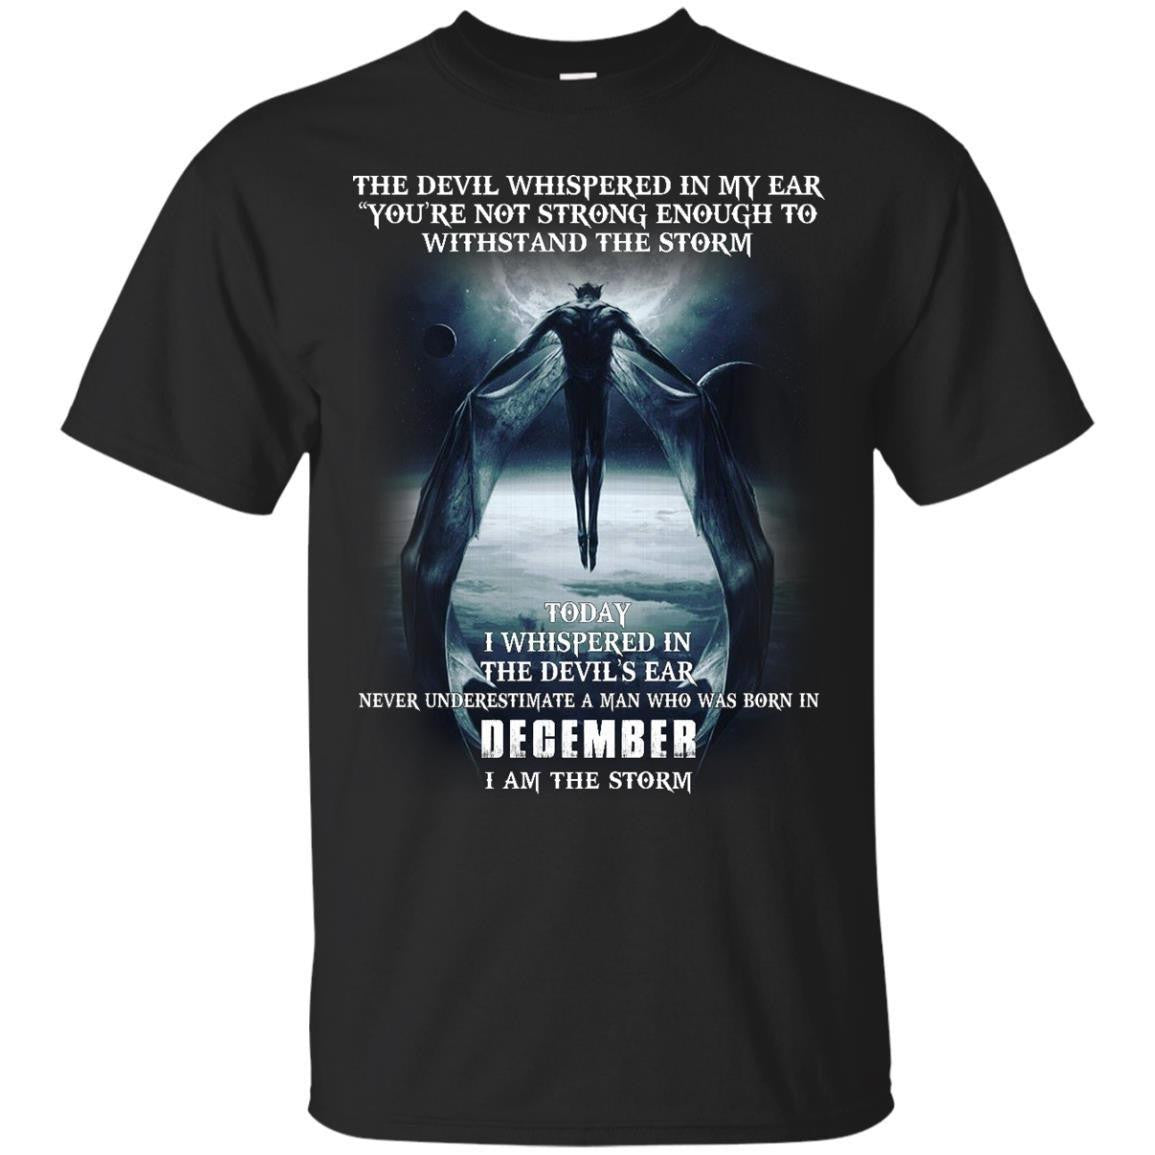 The Devil whispered in my ear, a Man born in December shirt, tank